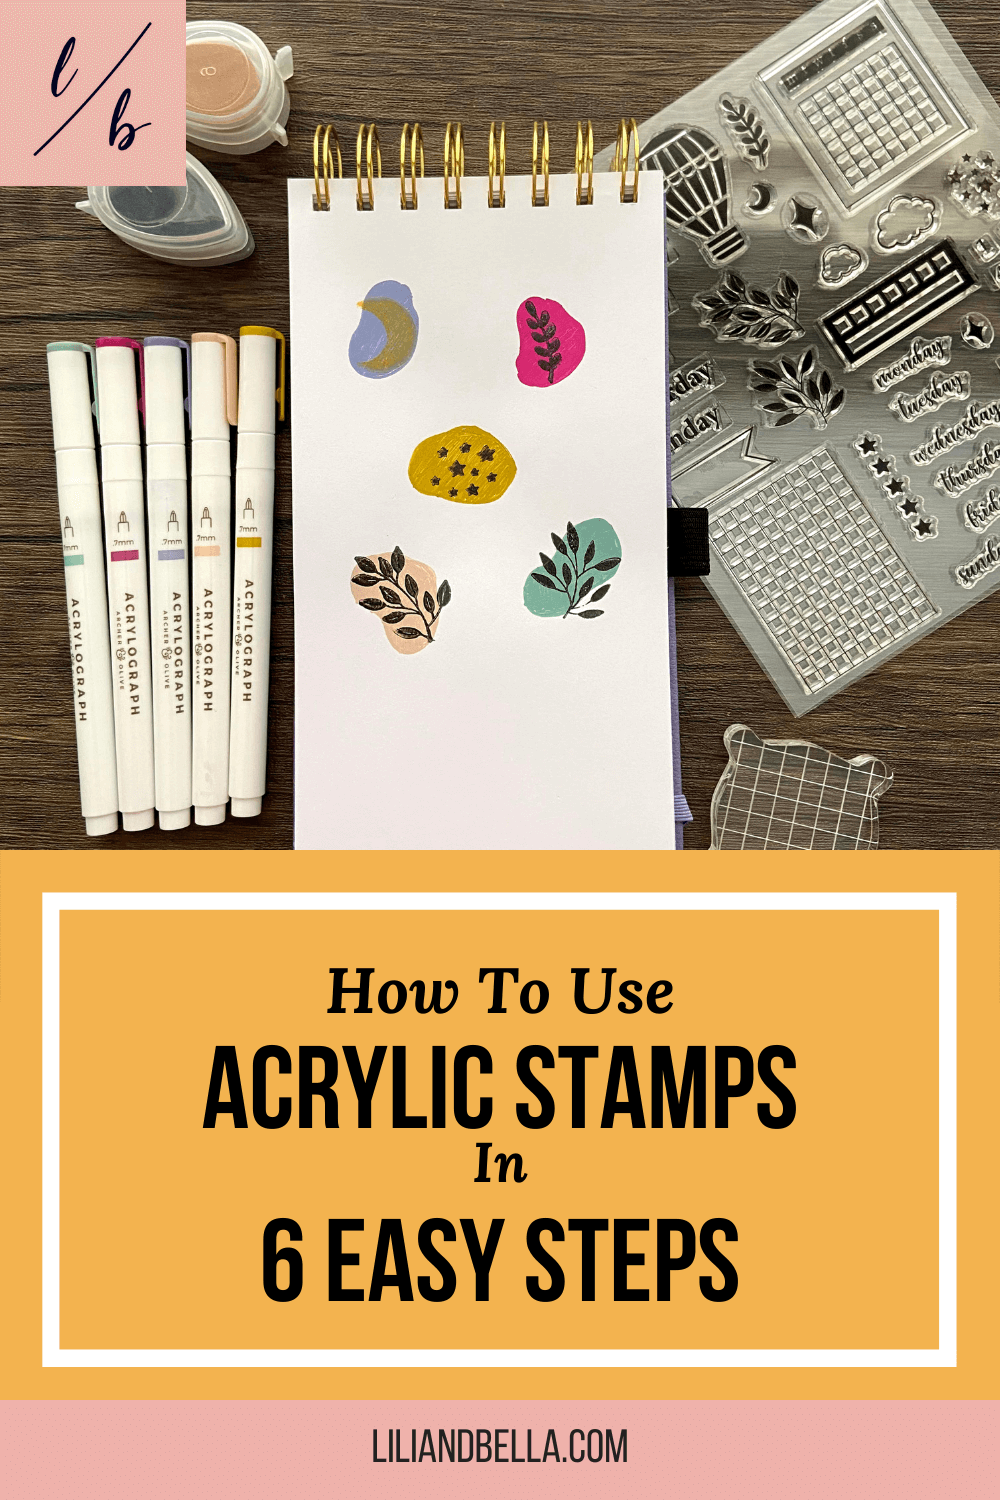 How To Use Acrylic Stamps in 6 Super Easy Steps For Beginners